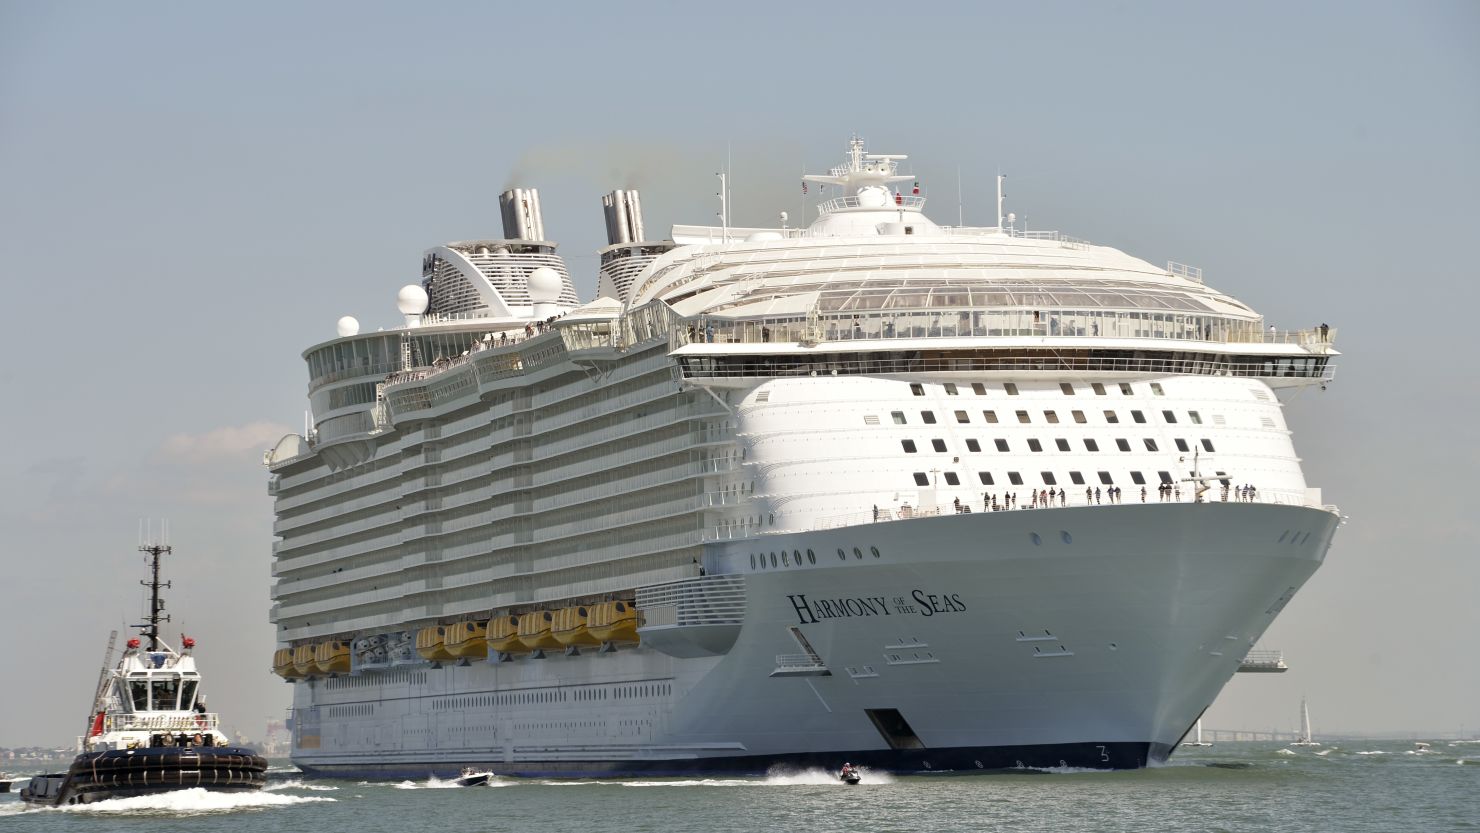 Harmony of the Seas is the world's largest cruise liner, measuring 1,188 feet long (362 meters). 